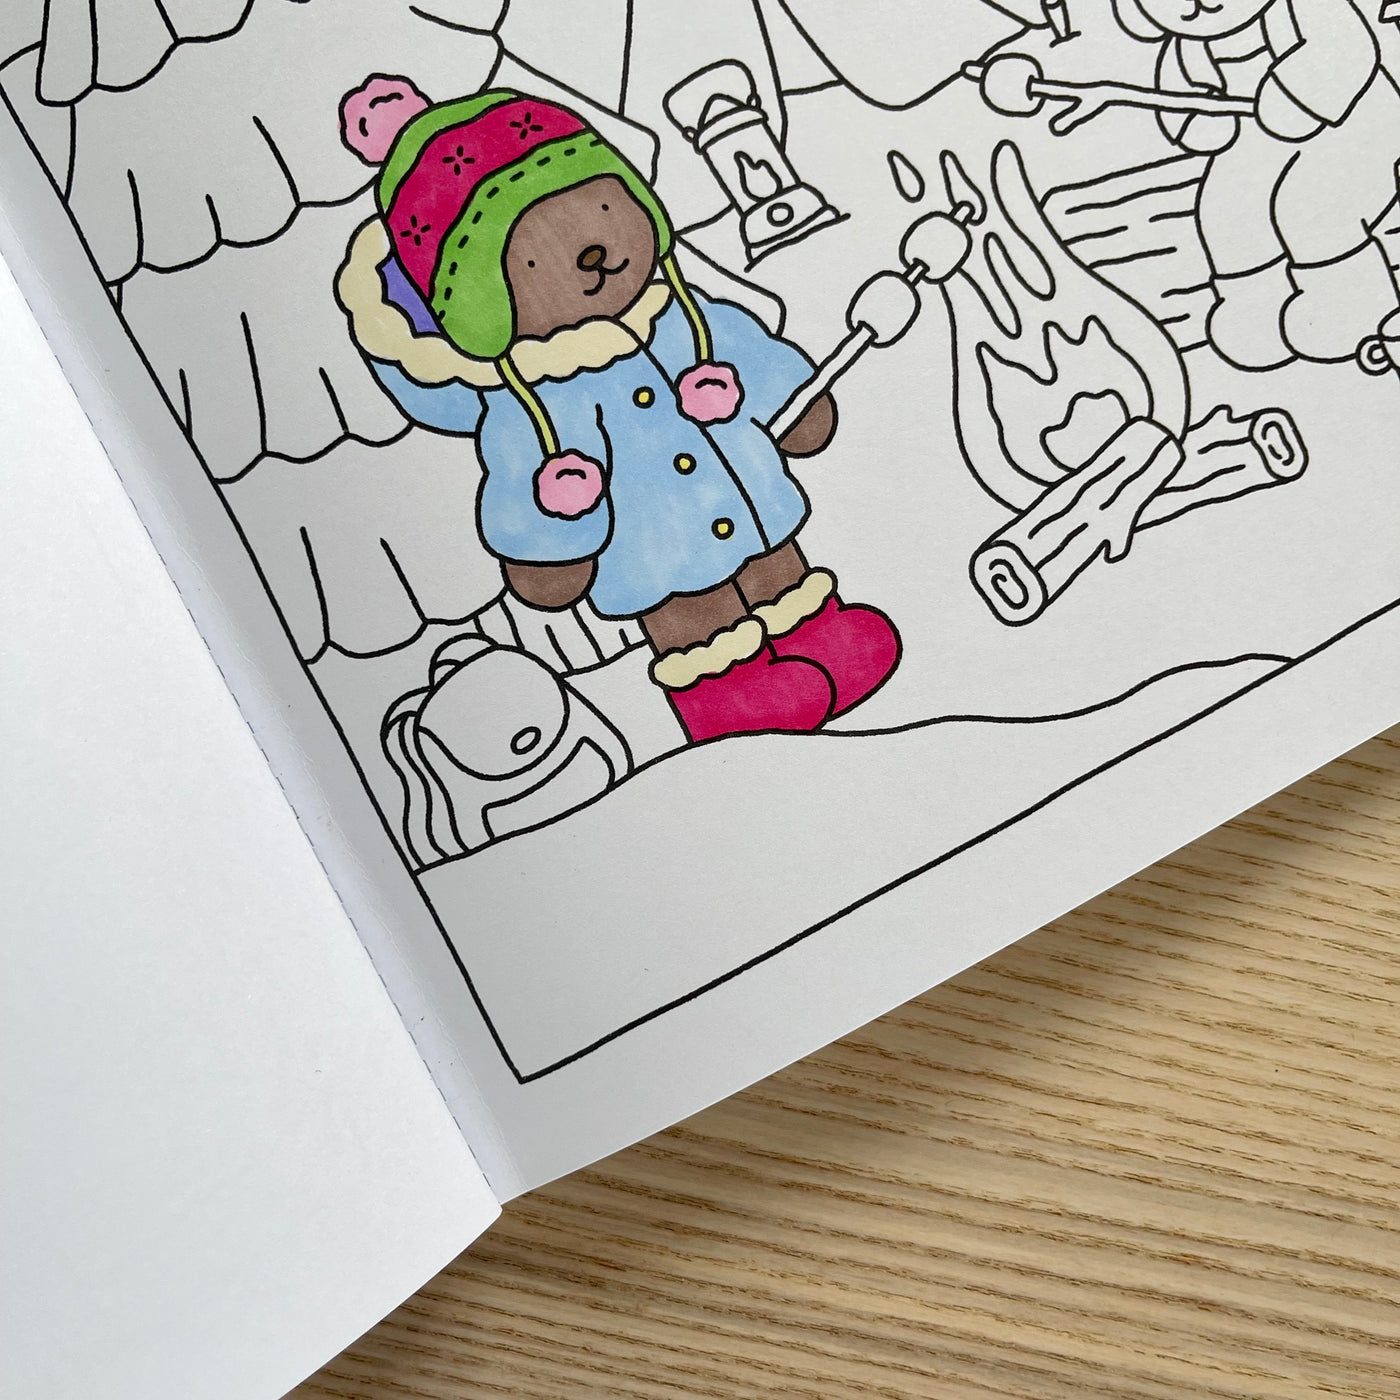 Bobbie Goods on Instagram: IT'S HERE! ✨ limited edition ✨ fall coloring  books drop this Saturday 10/9 @ 11am PST 🍂 which page are you most excited  to color? 🥺 . . . #